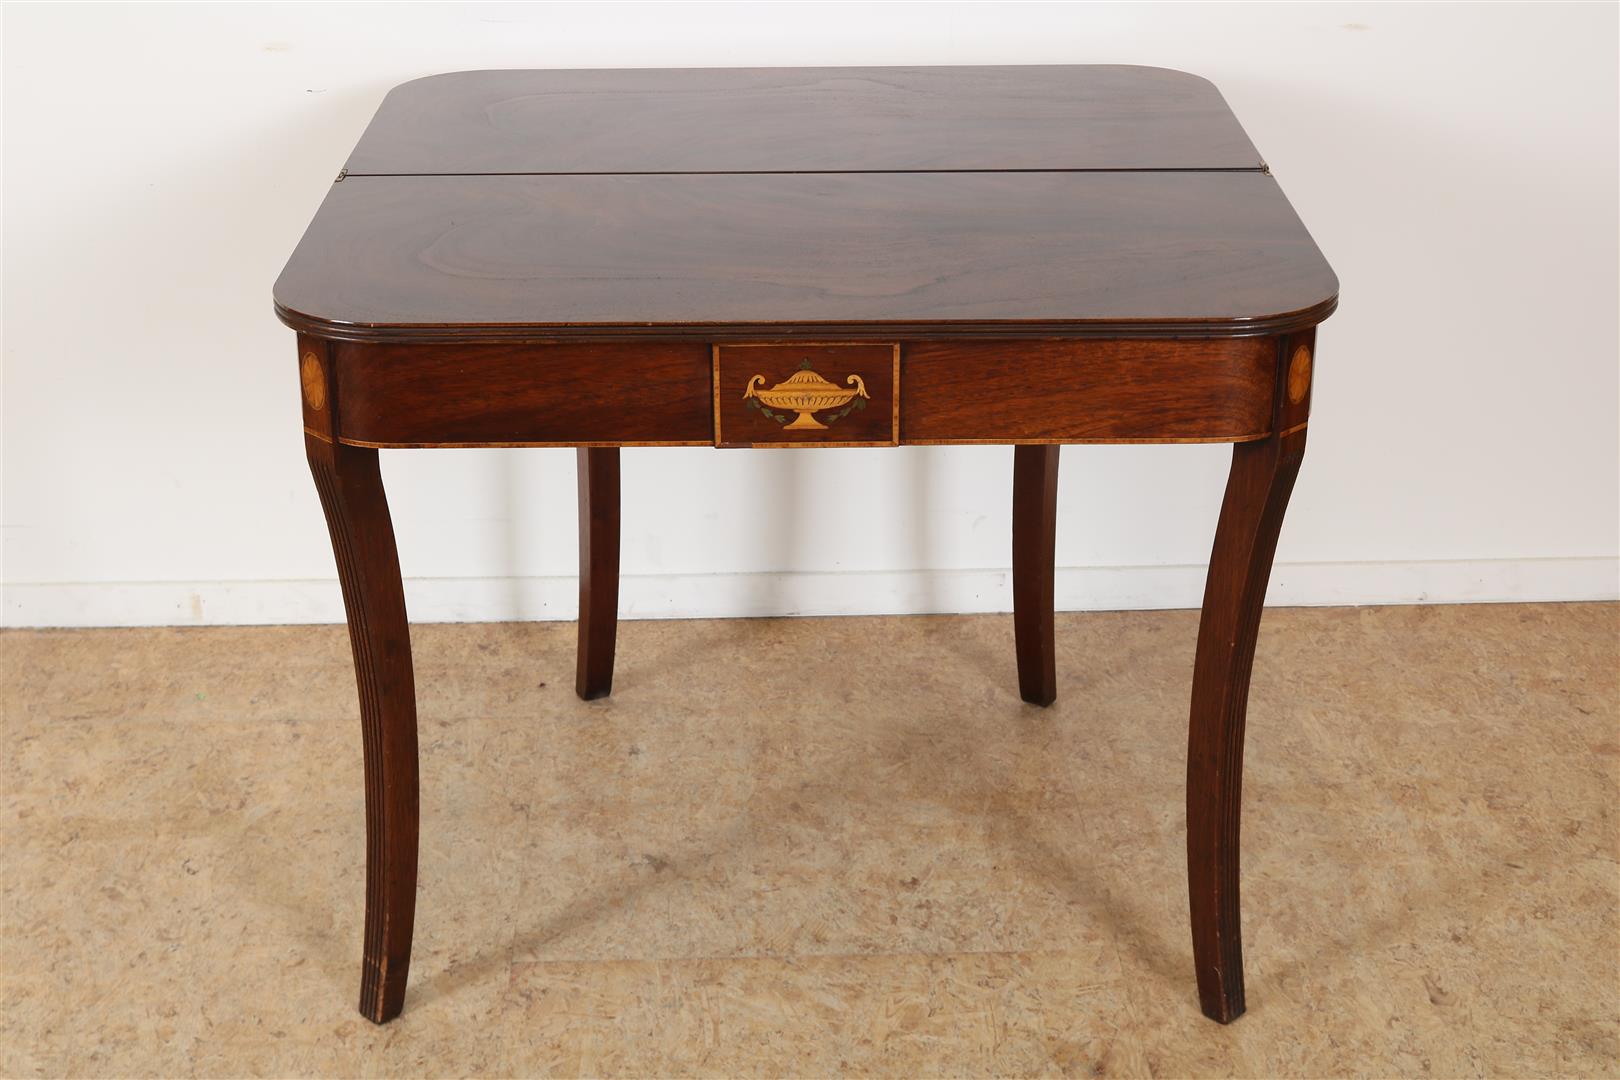 Mahogany Georgian-style coffee/breakfast table with folding top, inlaid vase in skirting boards